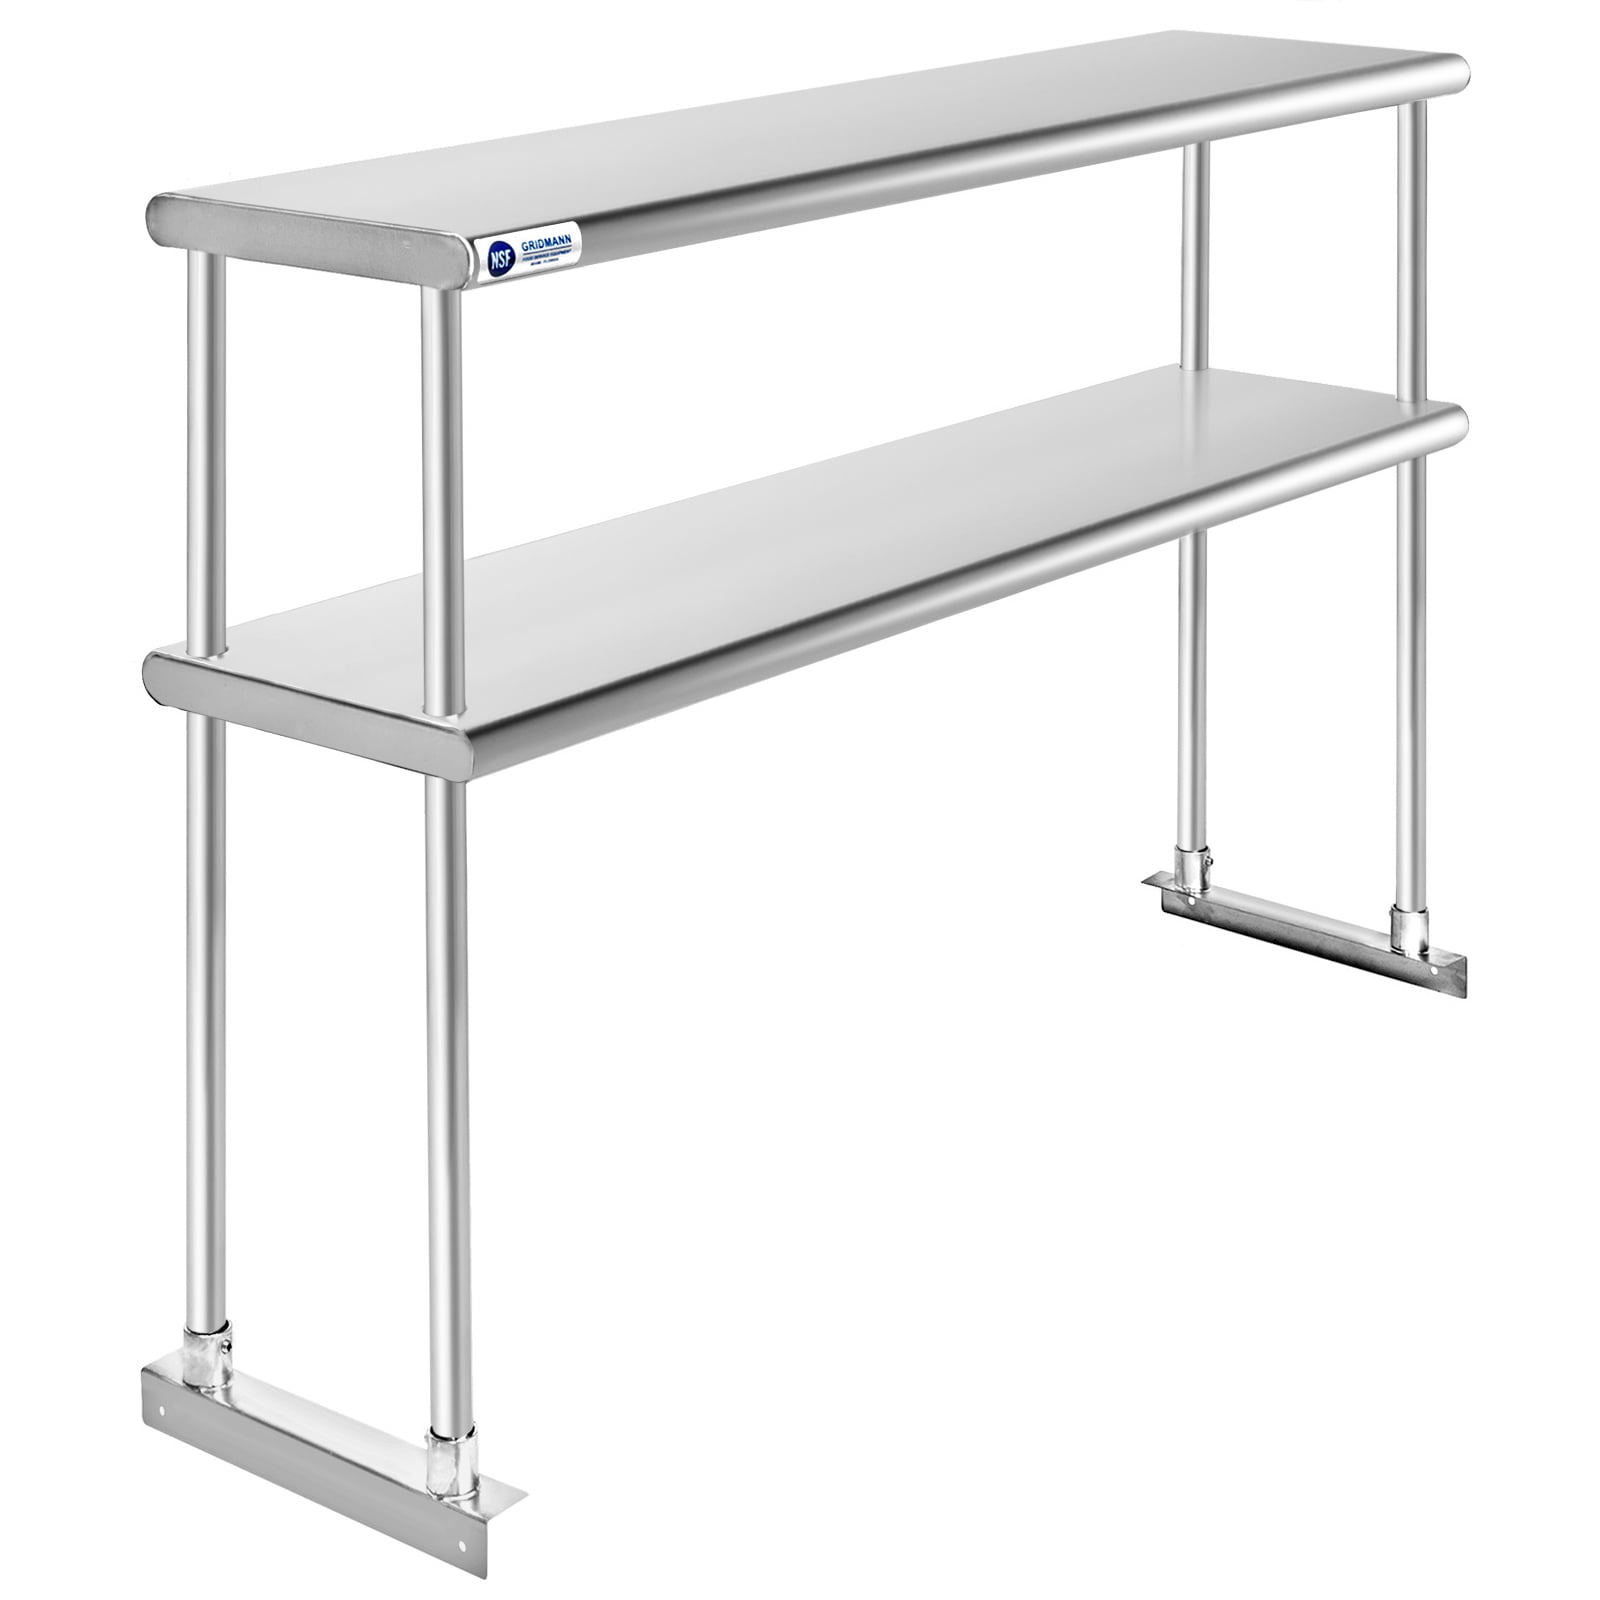 Fenix Sol Commercial Kitchen Stainless Steel Double Overshelf for Work Tables 18 W x 60L x 31H NSF Certified 